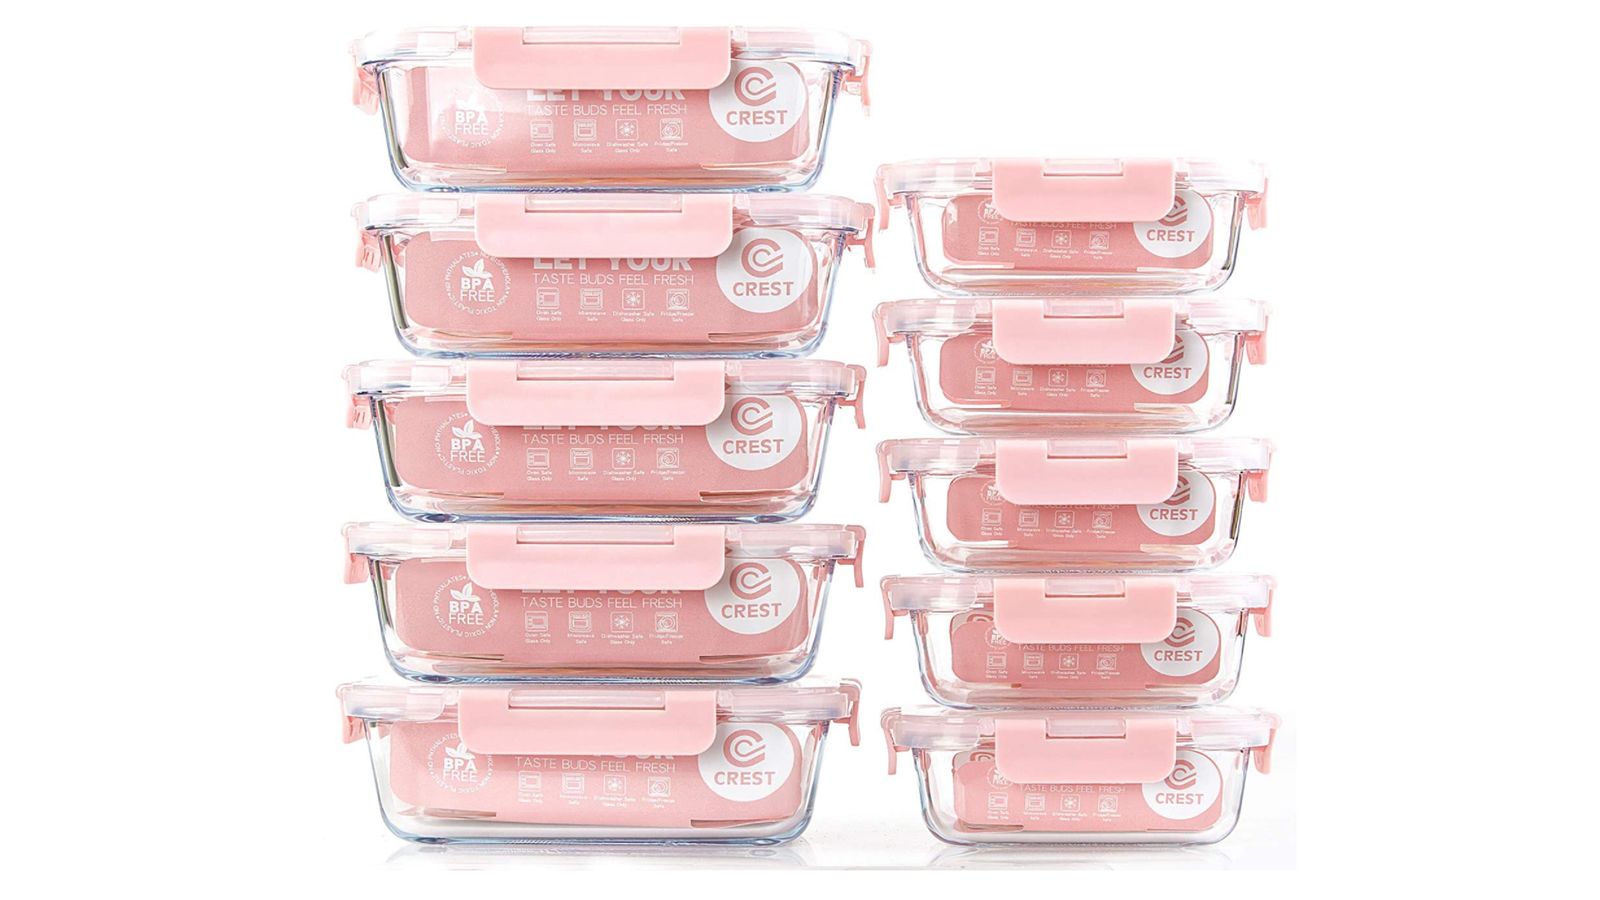 https://media.cnn.com/api/v1/images/stellar/prod/210930102636-best-meal-prep-containers-c-crest-glass-meal-prep-containers-10-pack.jpg?q=w_1600,h_900,x_0,y_0,c_fill